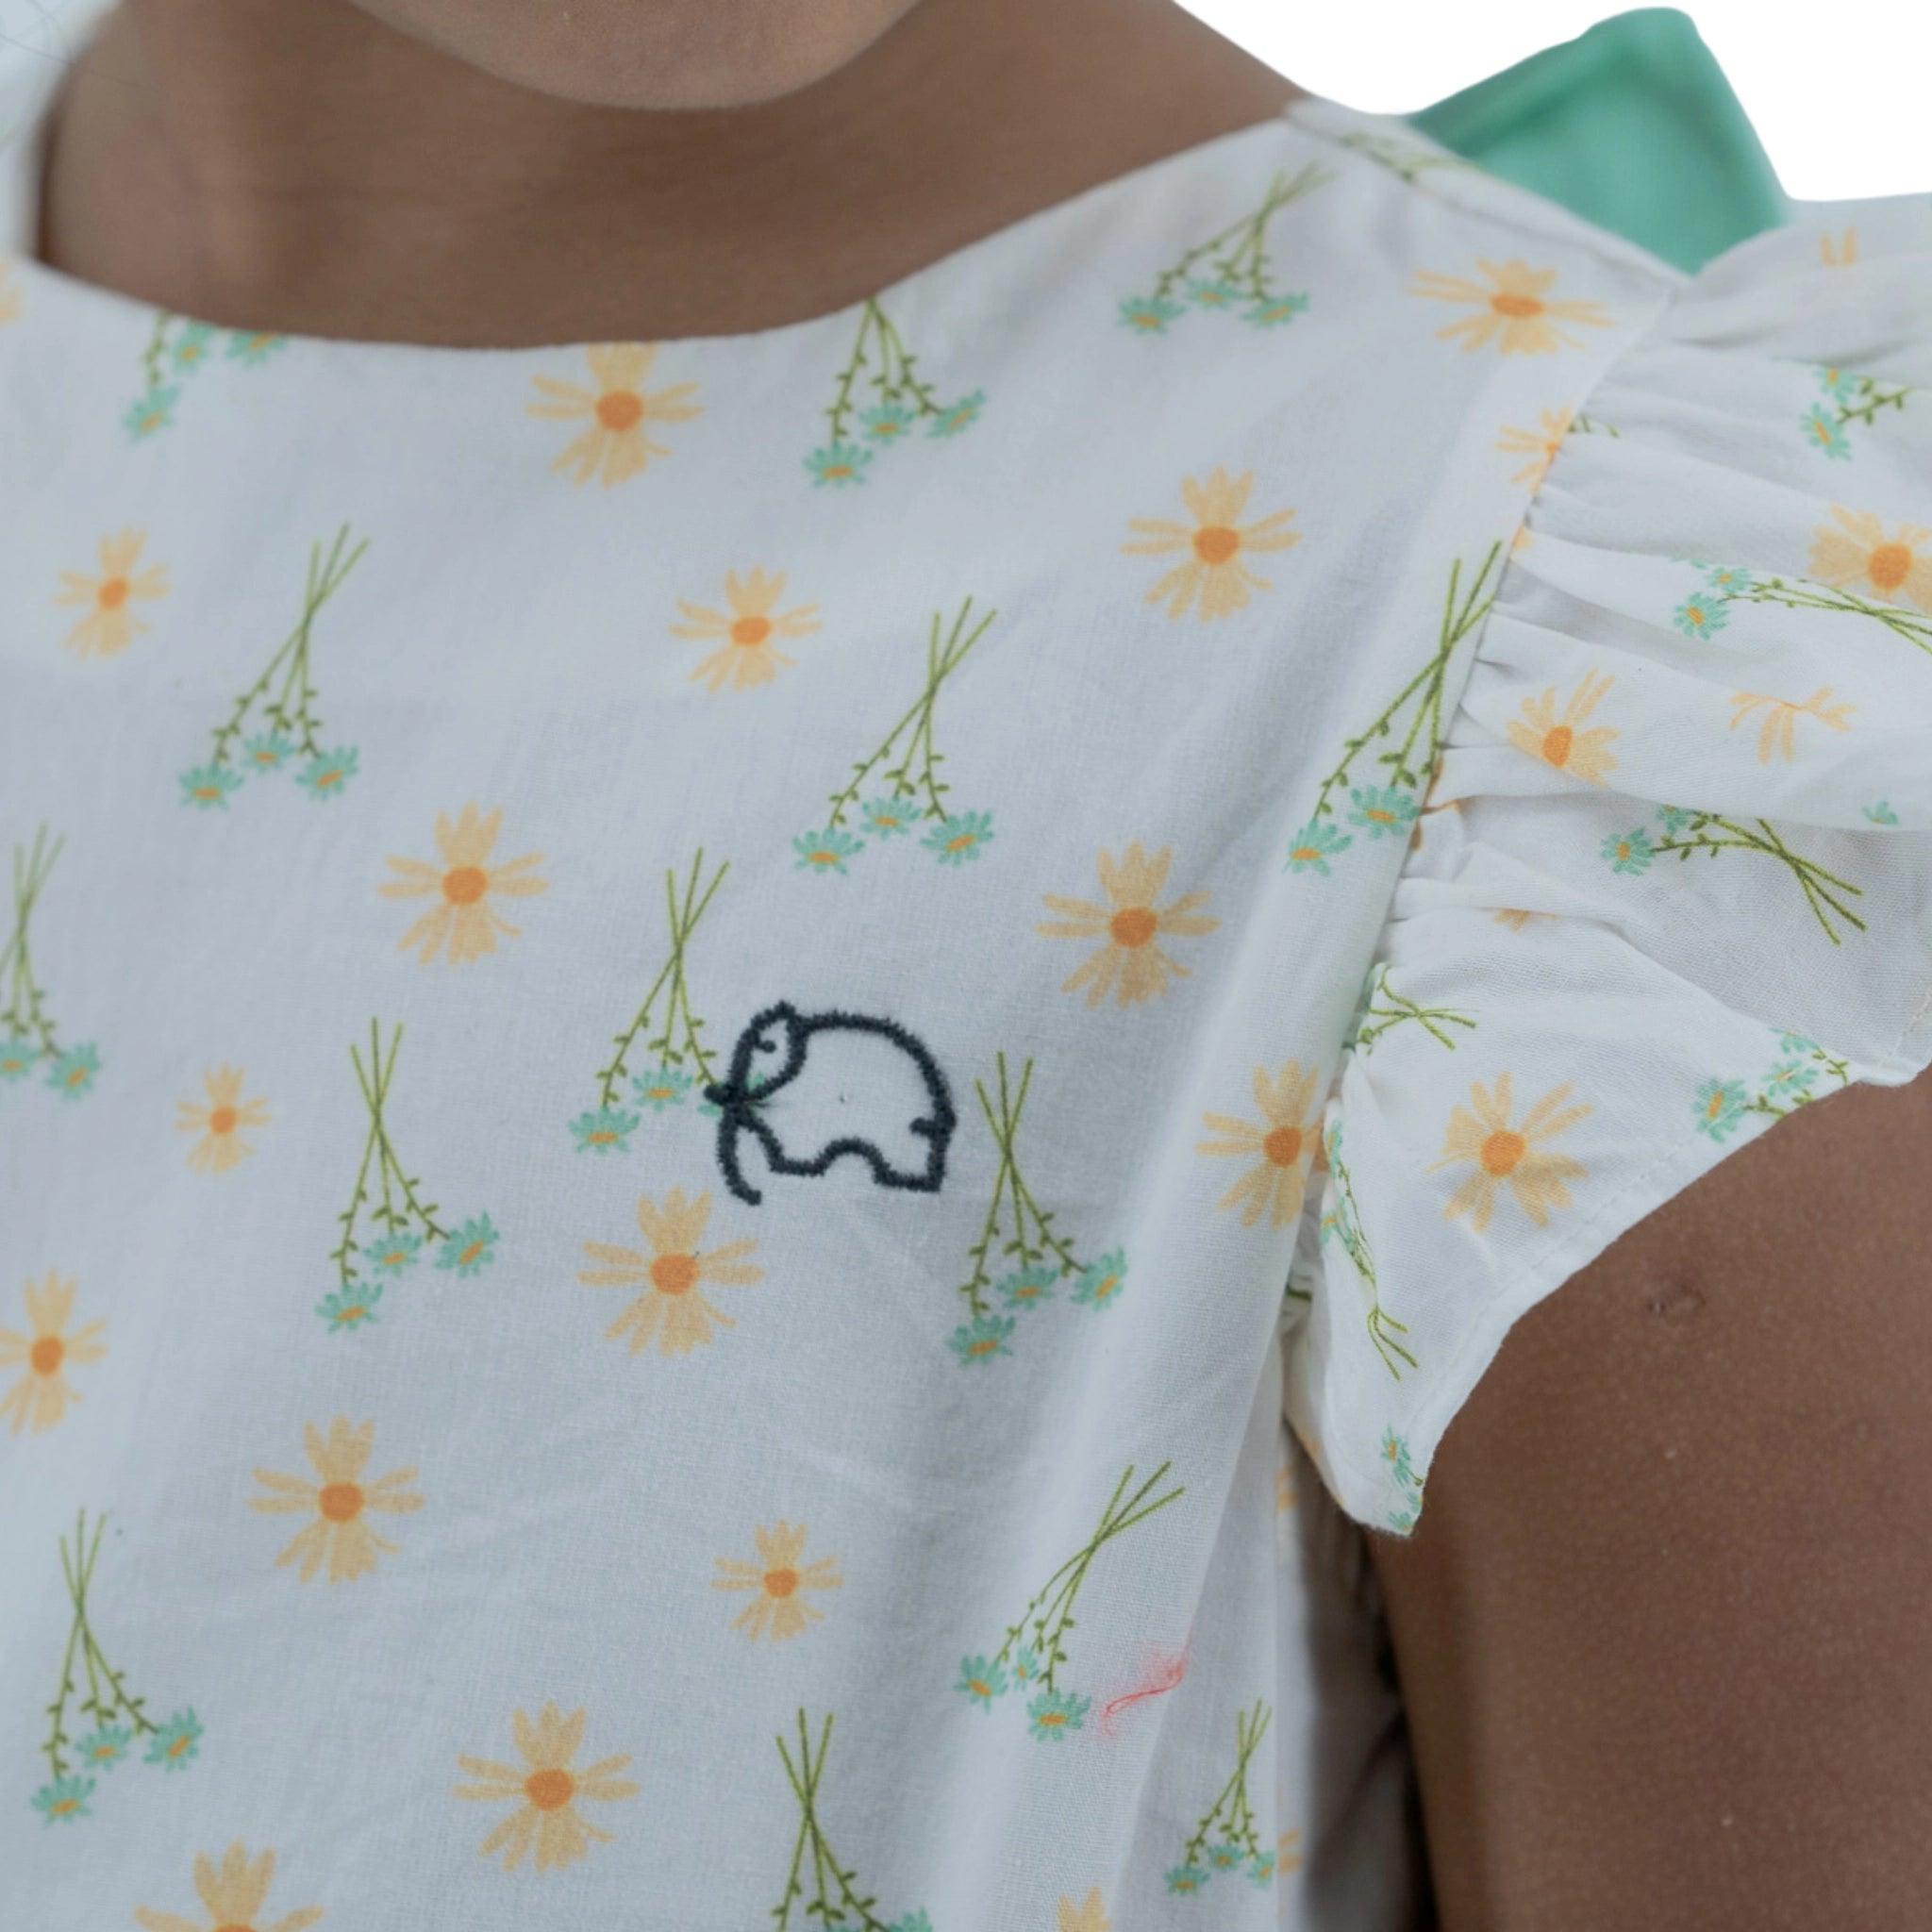 Close-up of a person wearing a Karee Petite Blossom Cotton Dress in Smoked Pearl with a small embroidered car design.